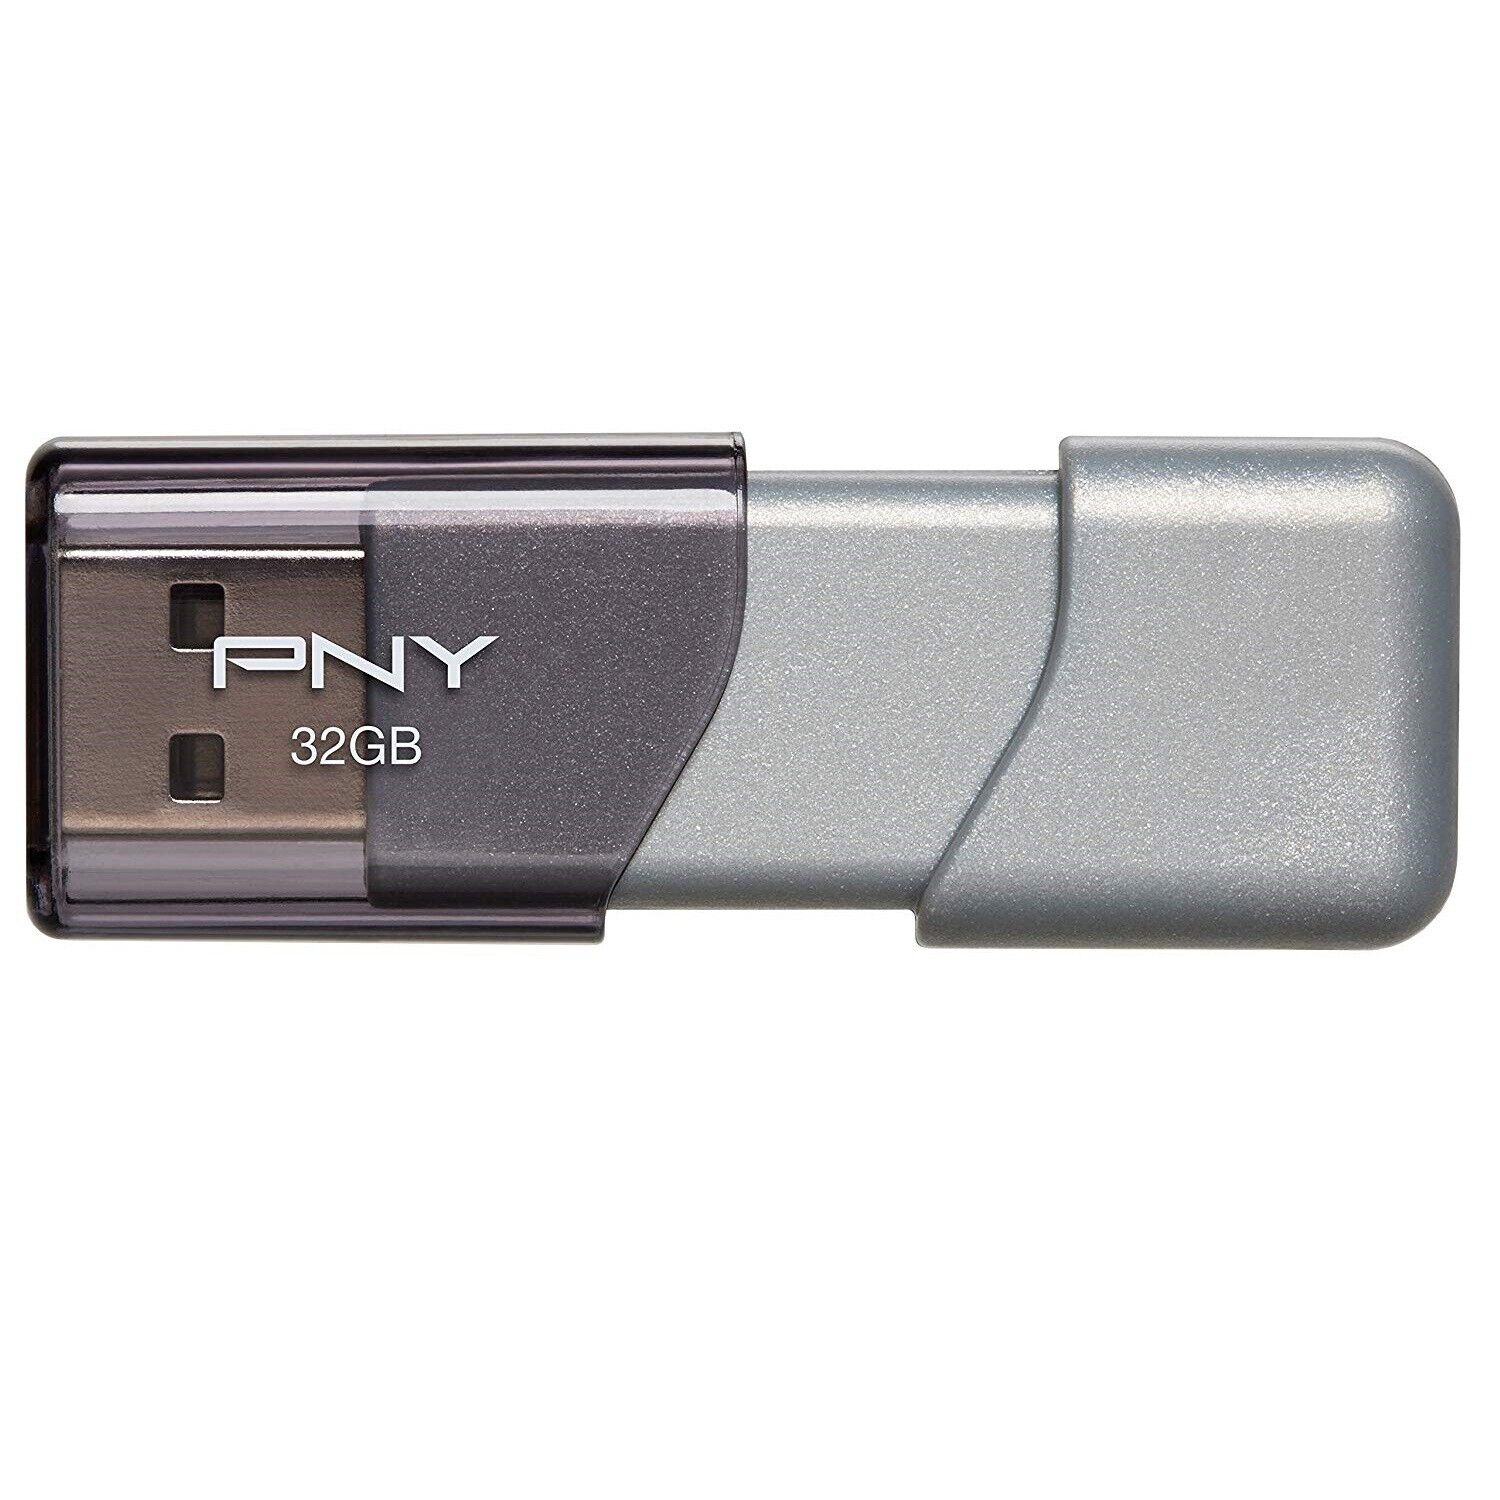 PNY Attache Turbo 3.0 Flash Drive USB Memory Stick for Computers Laptops lot